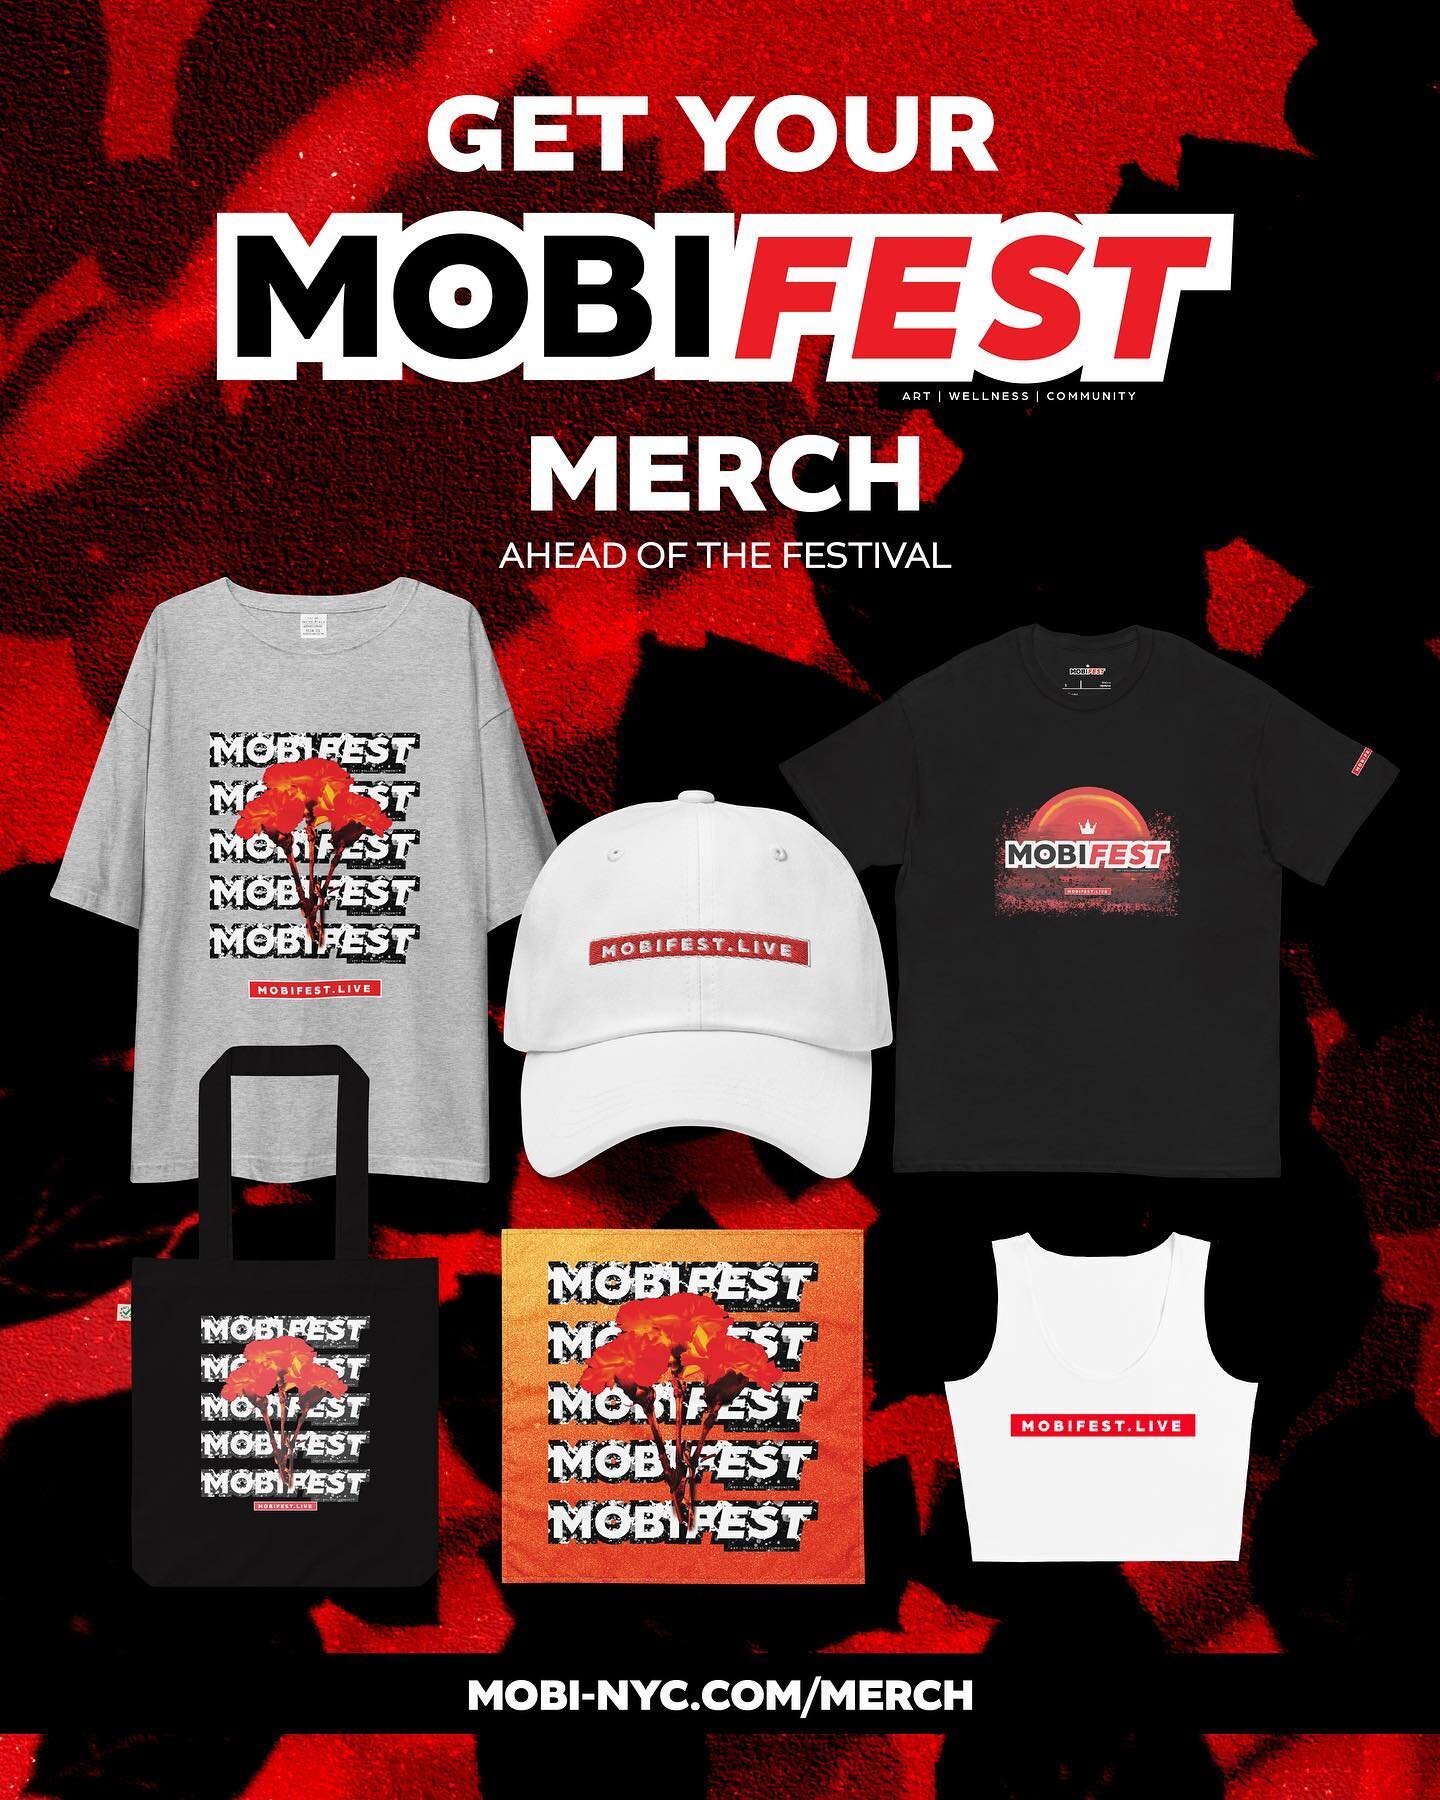 ORDER YOUR MOBIFEST MERCH AHEAD OF THE FESTIVAL AT mobi-nyc.com/merch

Stay tuned for more of the festival line up this week!